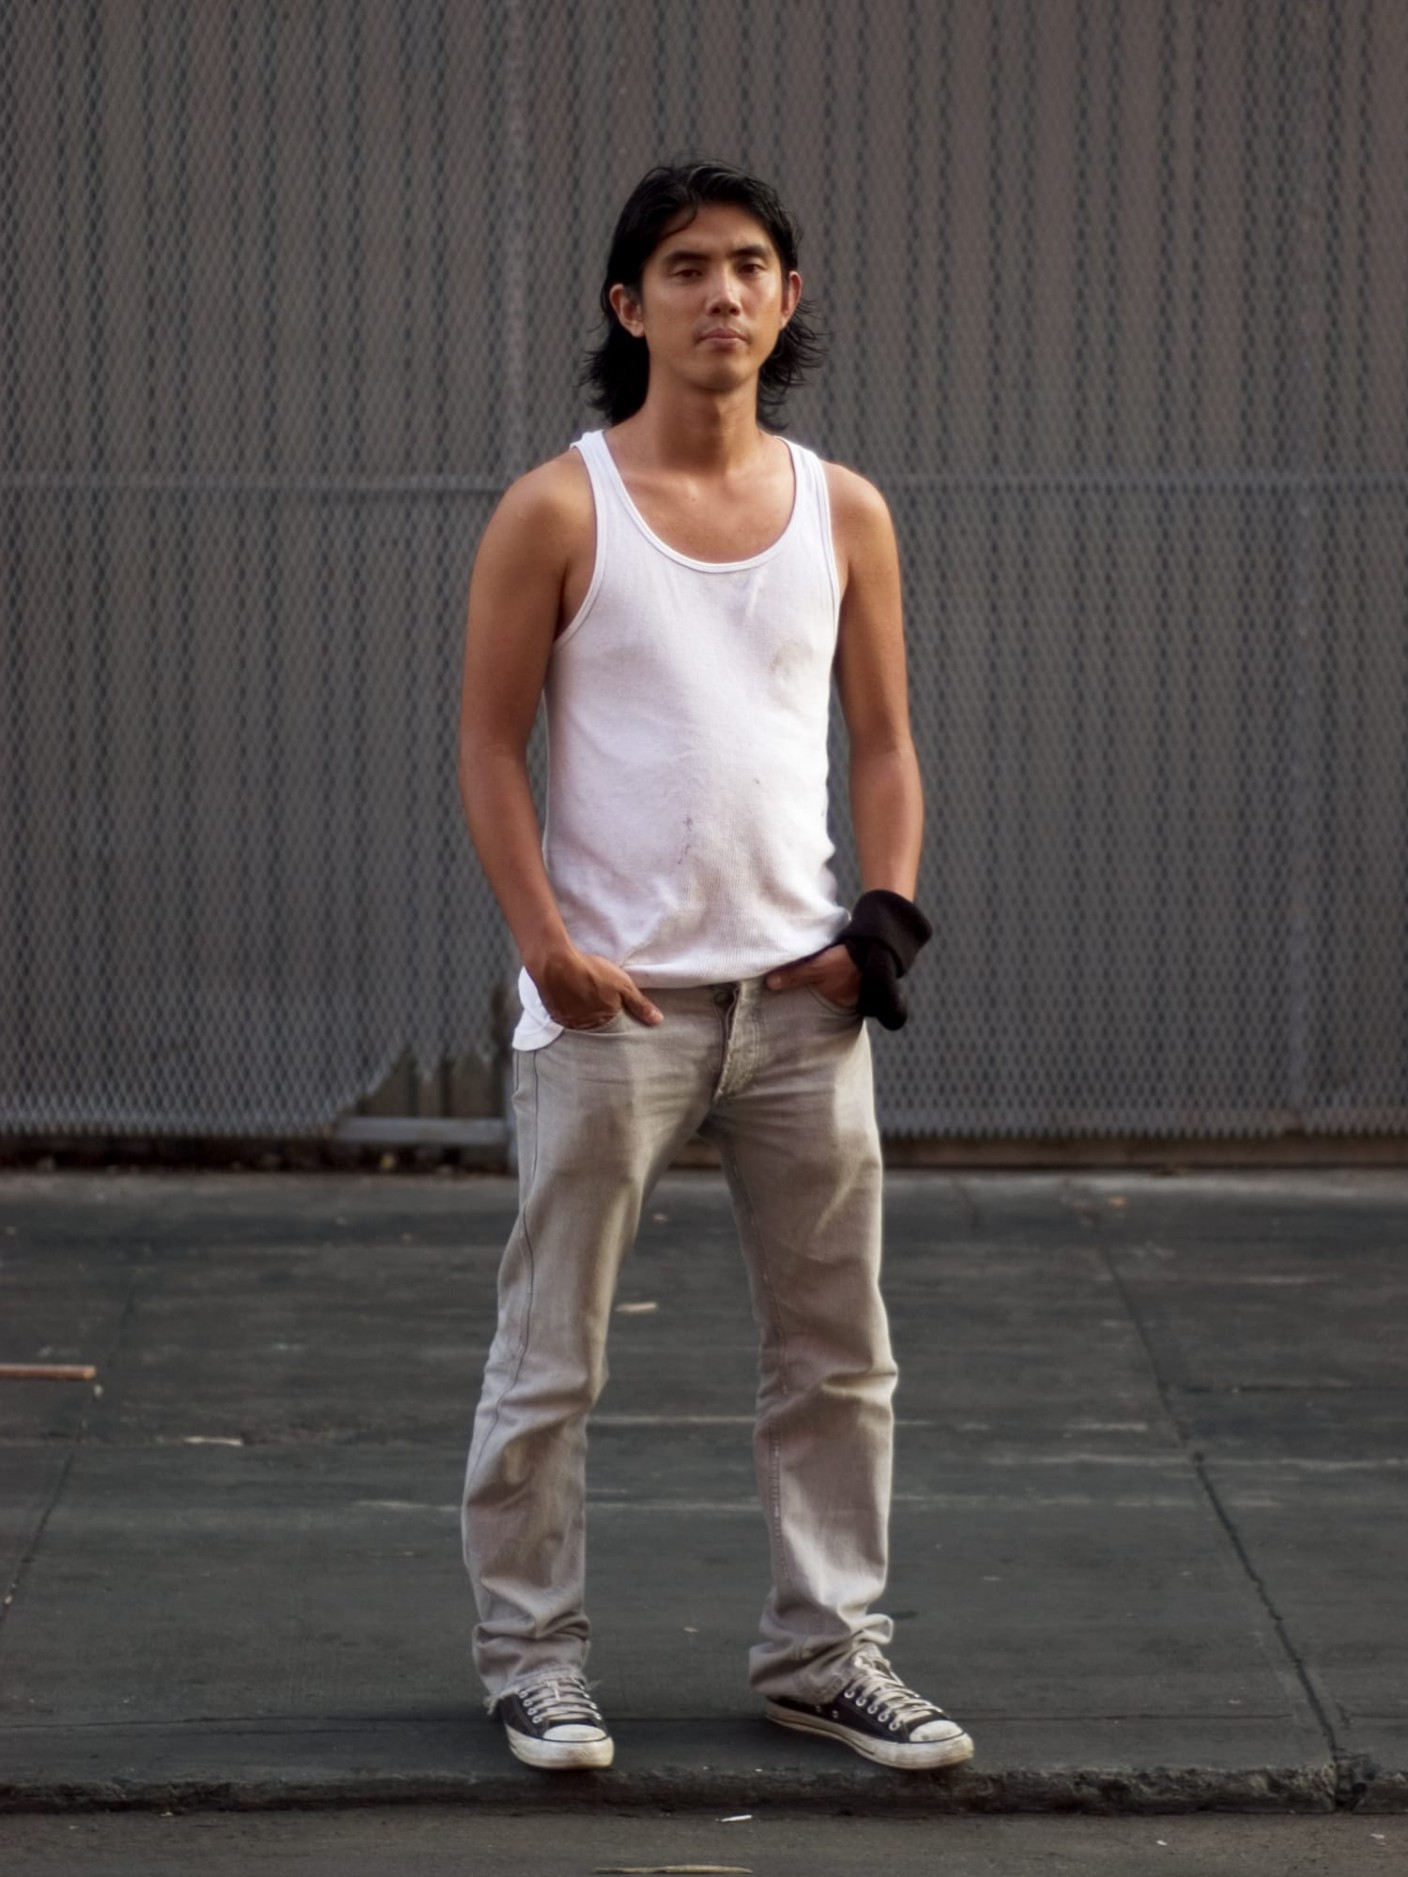 Portrait of a person in an all gray setting, wearing a white tank top and light gray pants